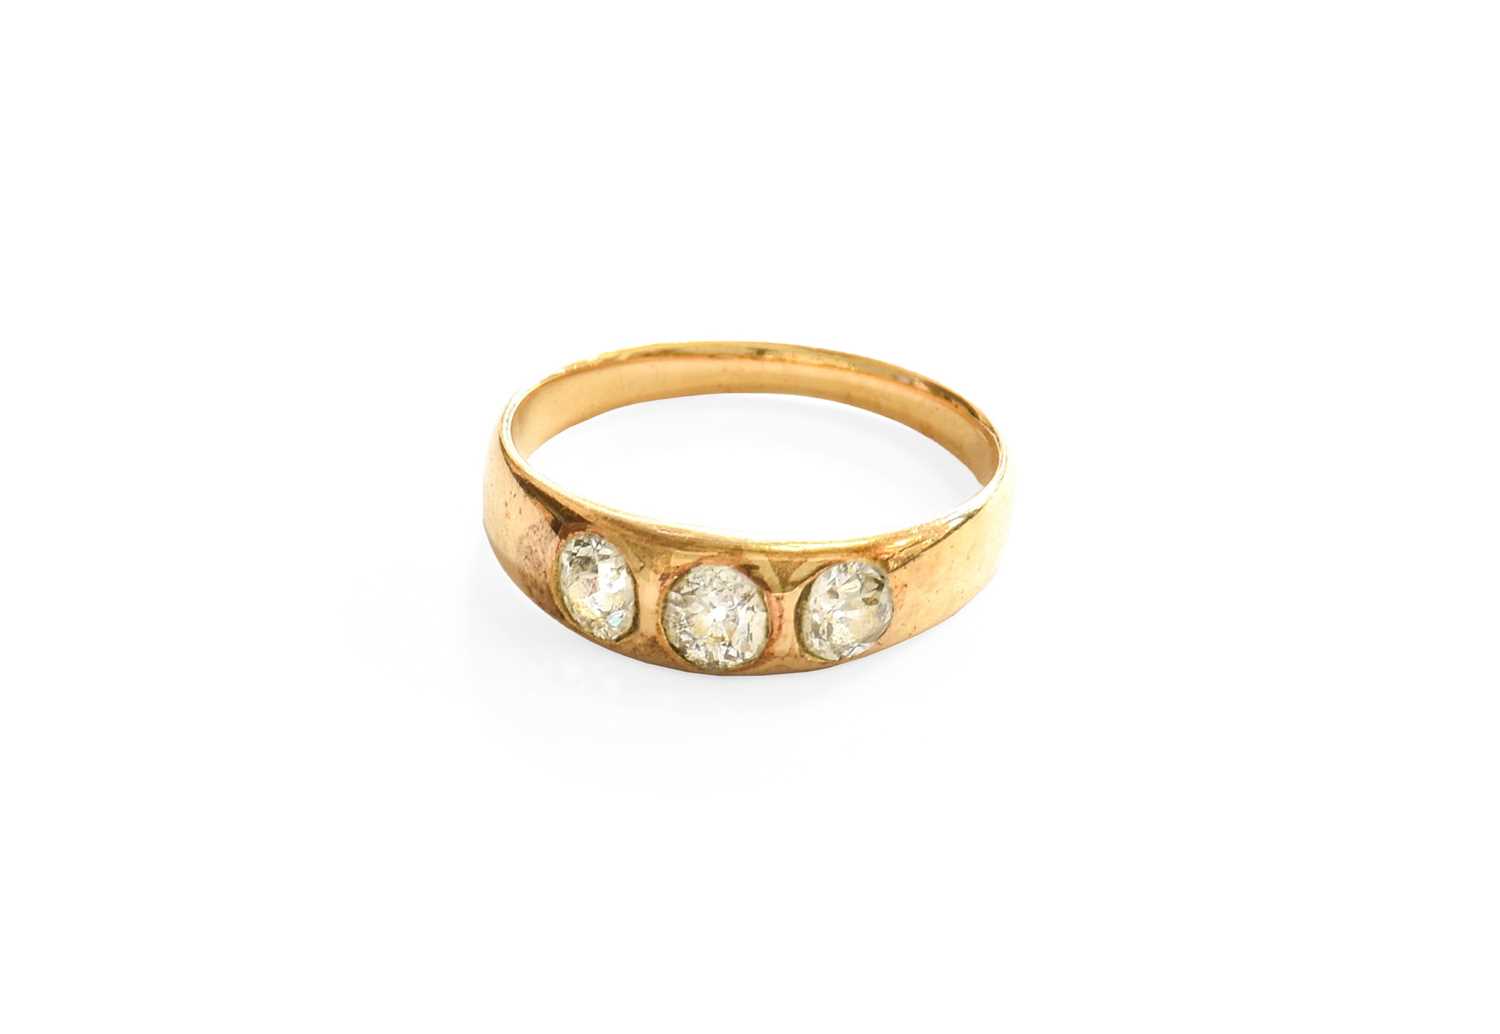 A Late Victorian Diamond Three Stone Ring, the old cut diamonds inset within a yellow plain polished